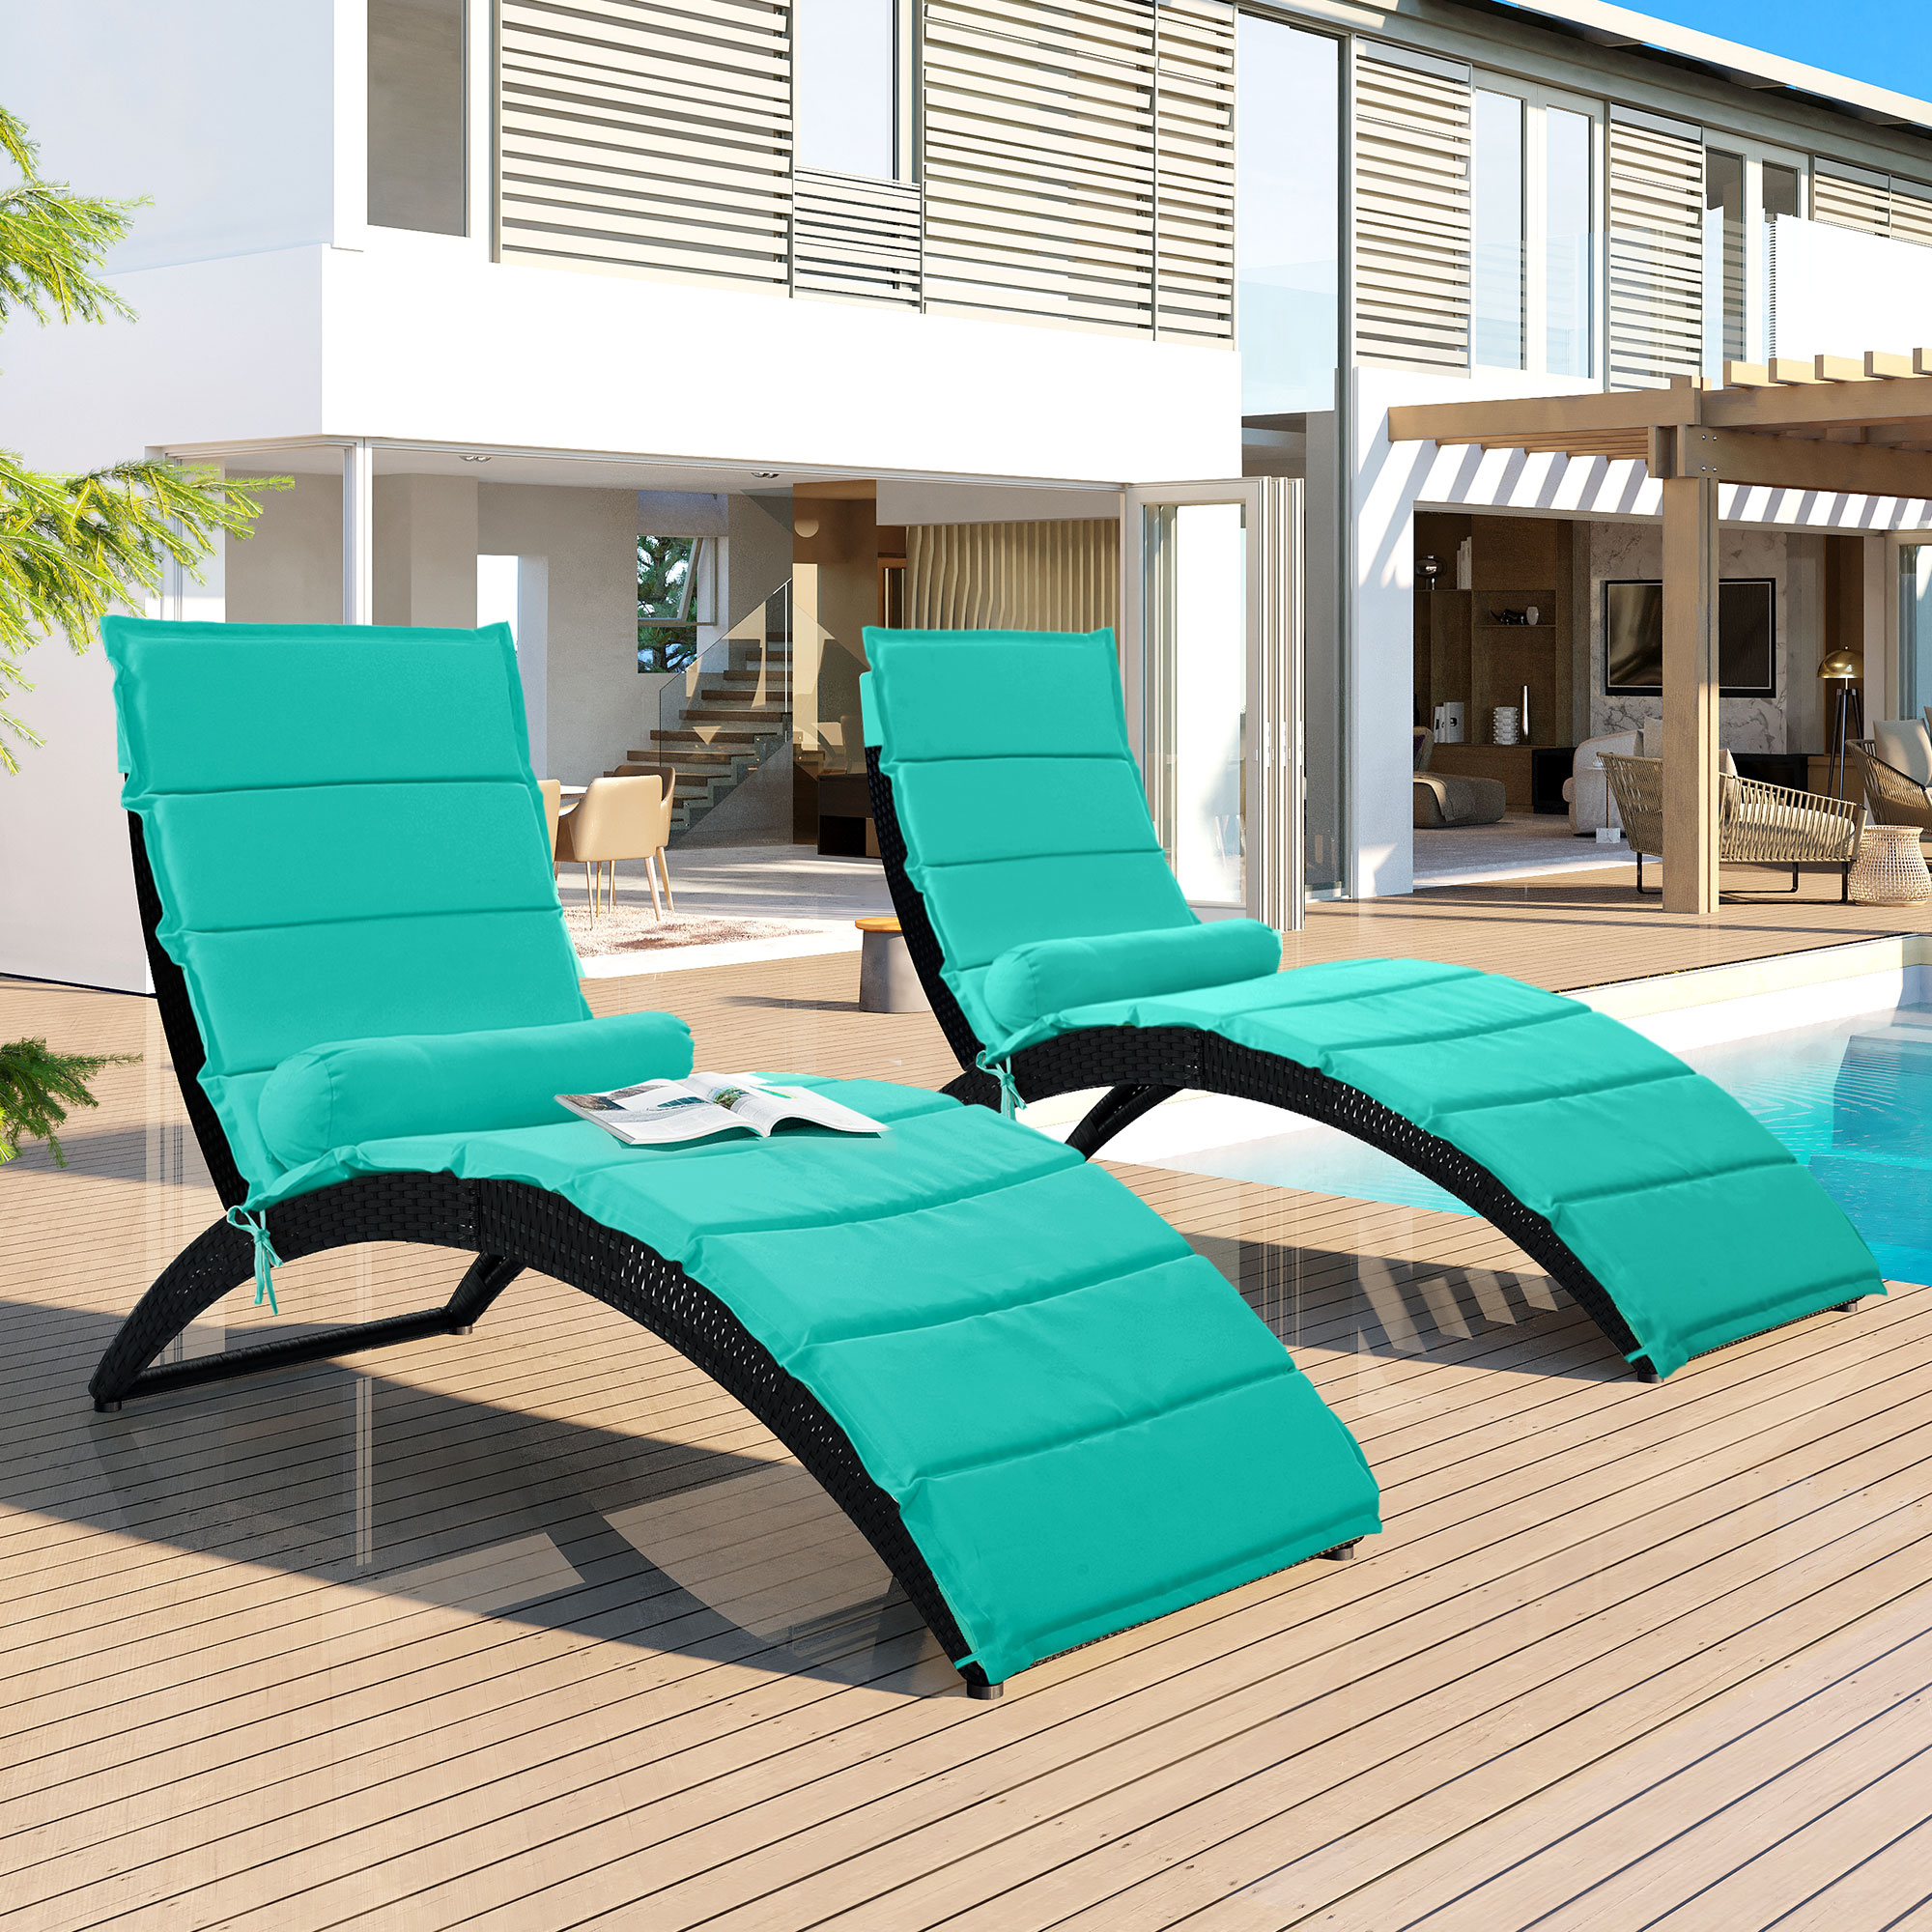 SYNGAR Chaise Lounge Chairs for Outside 2 Pieces, Patio Foldable Lounge Chairs Set of 2, Outdoor Rattan Wicker Pool Chaise Lounge Chairs Cushioned Poolside Chaise Lounge Set, Blue - image 1 of 10